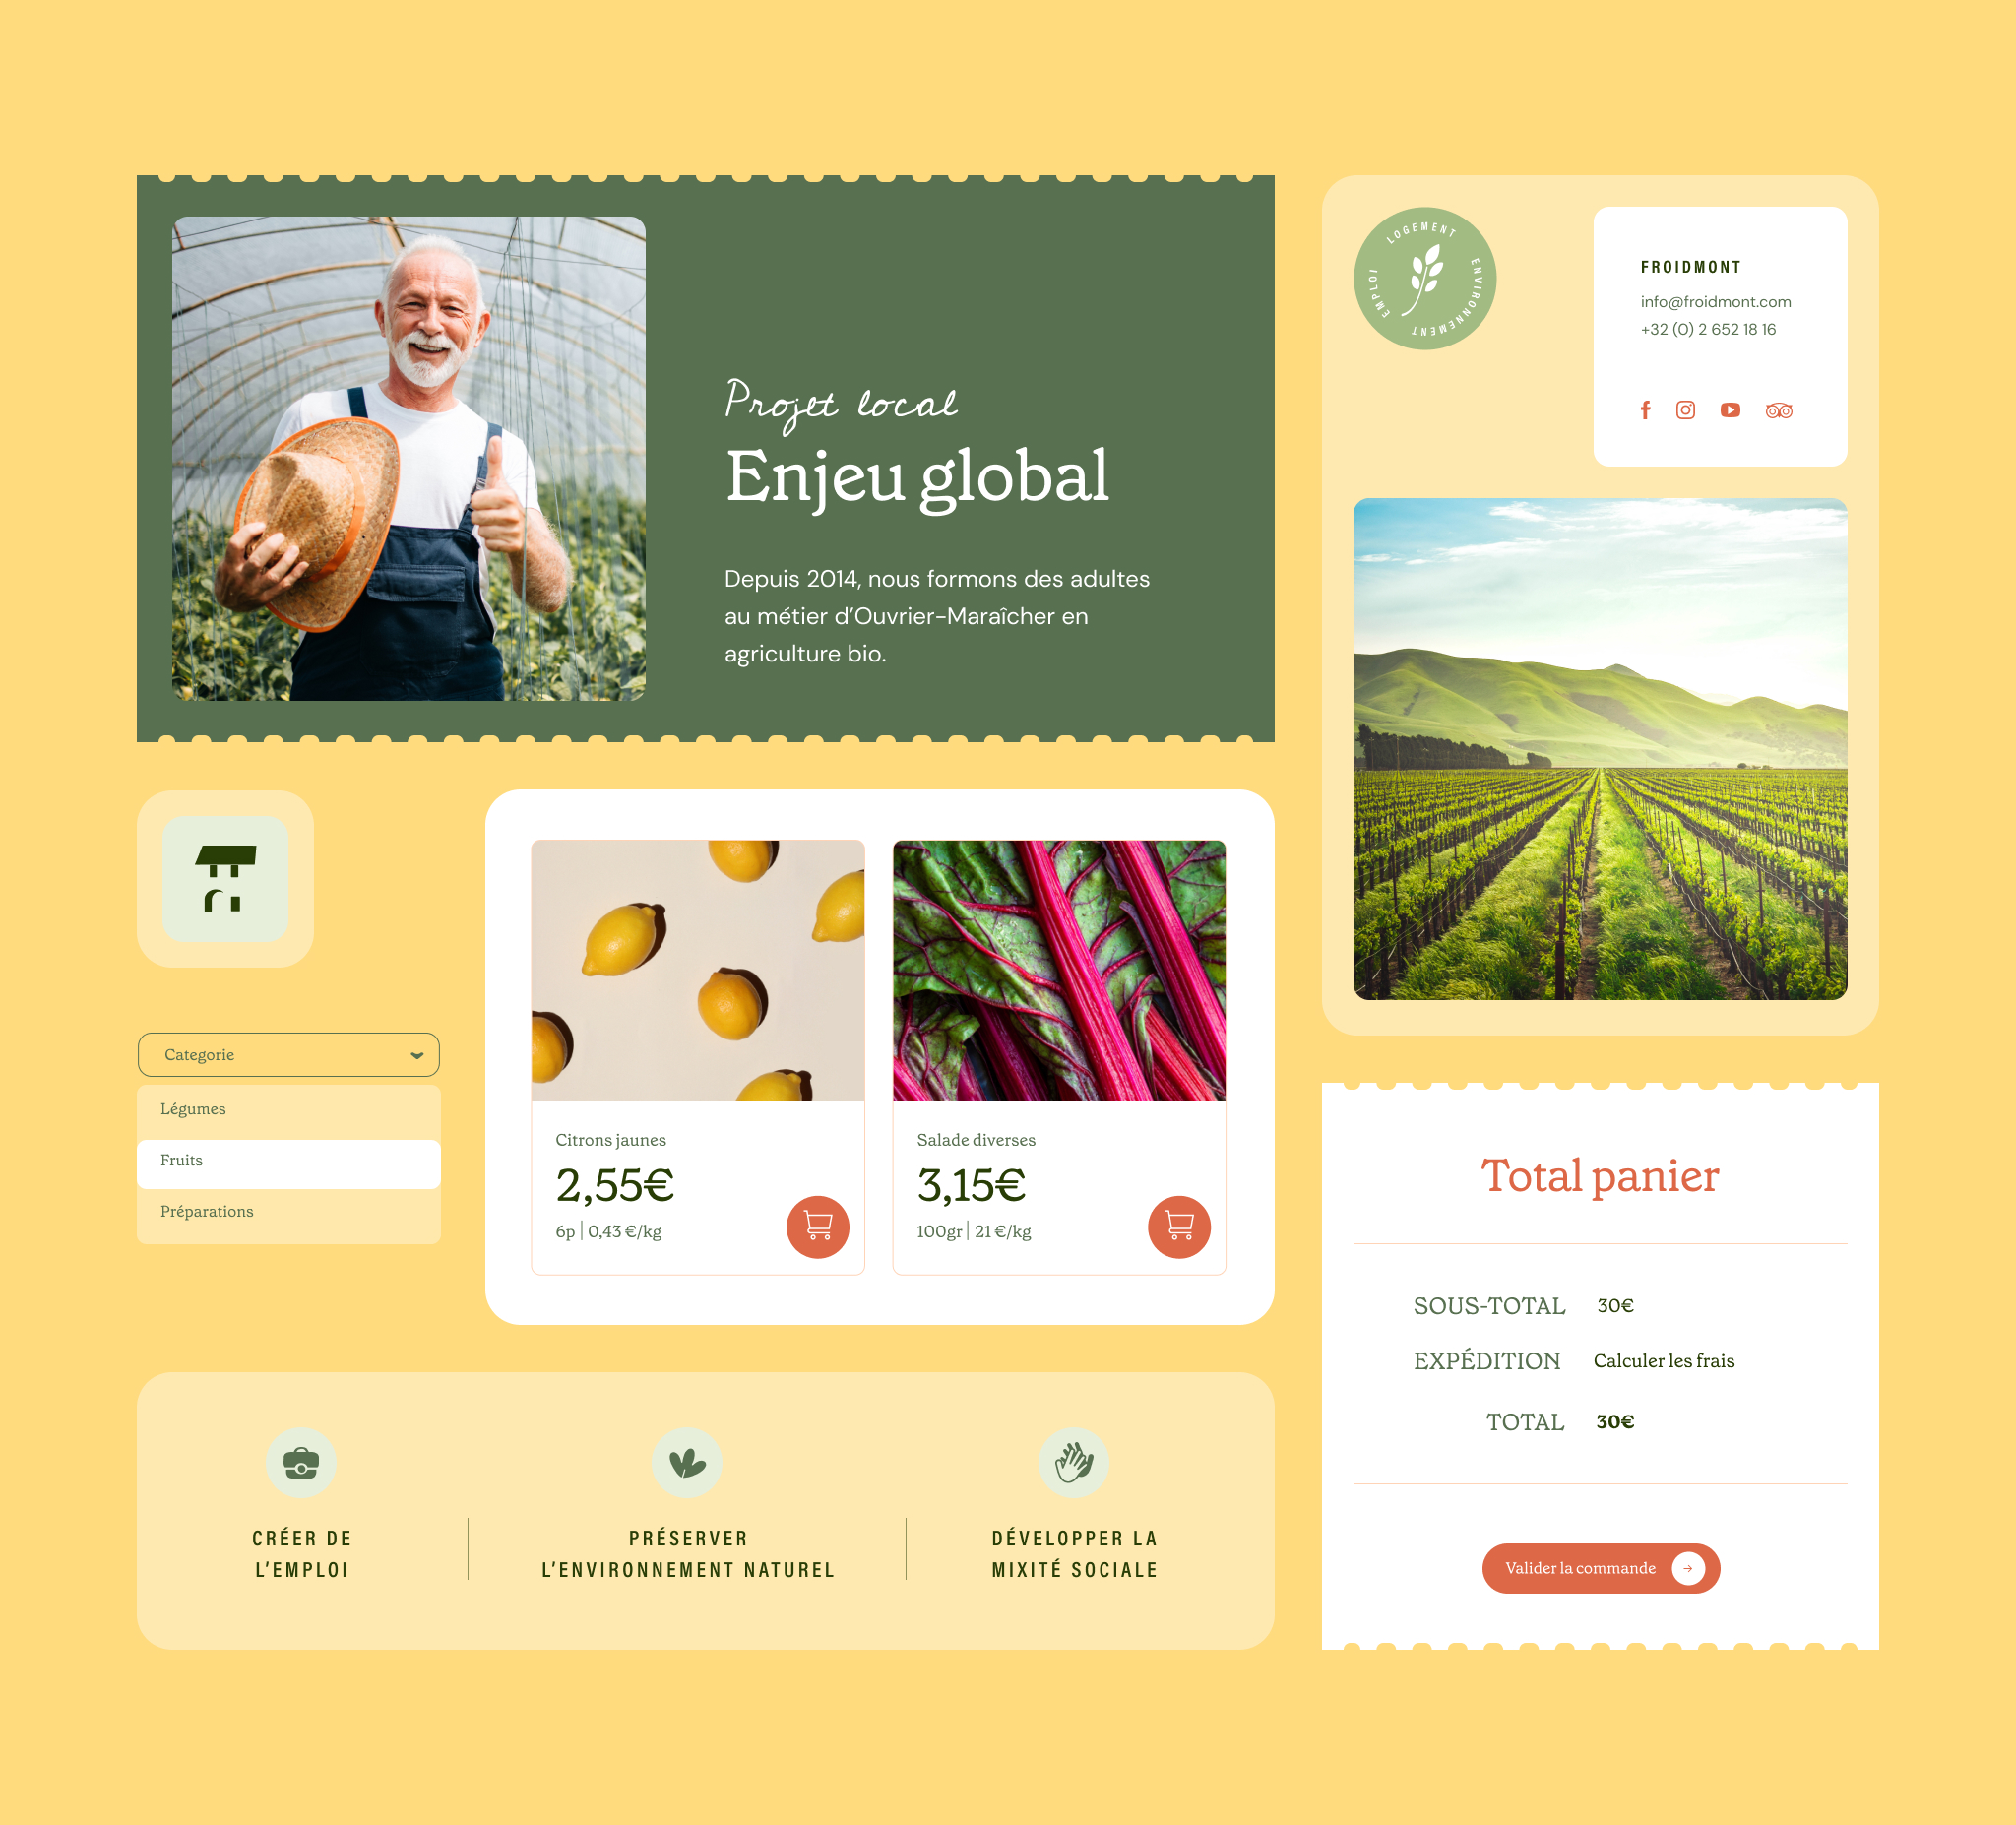 Details of Froidmont Farm's digital visual identity designed by our communications agency.